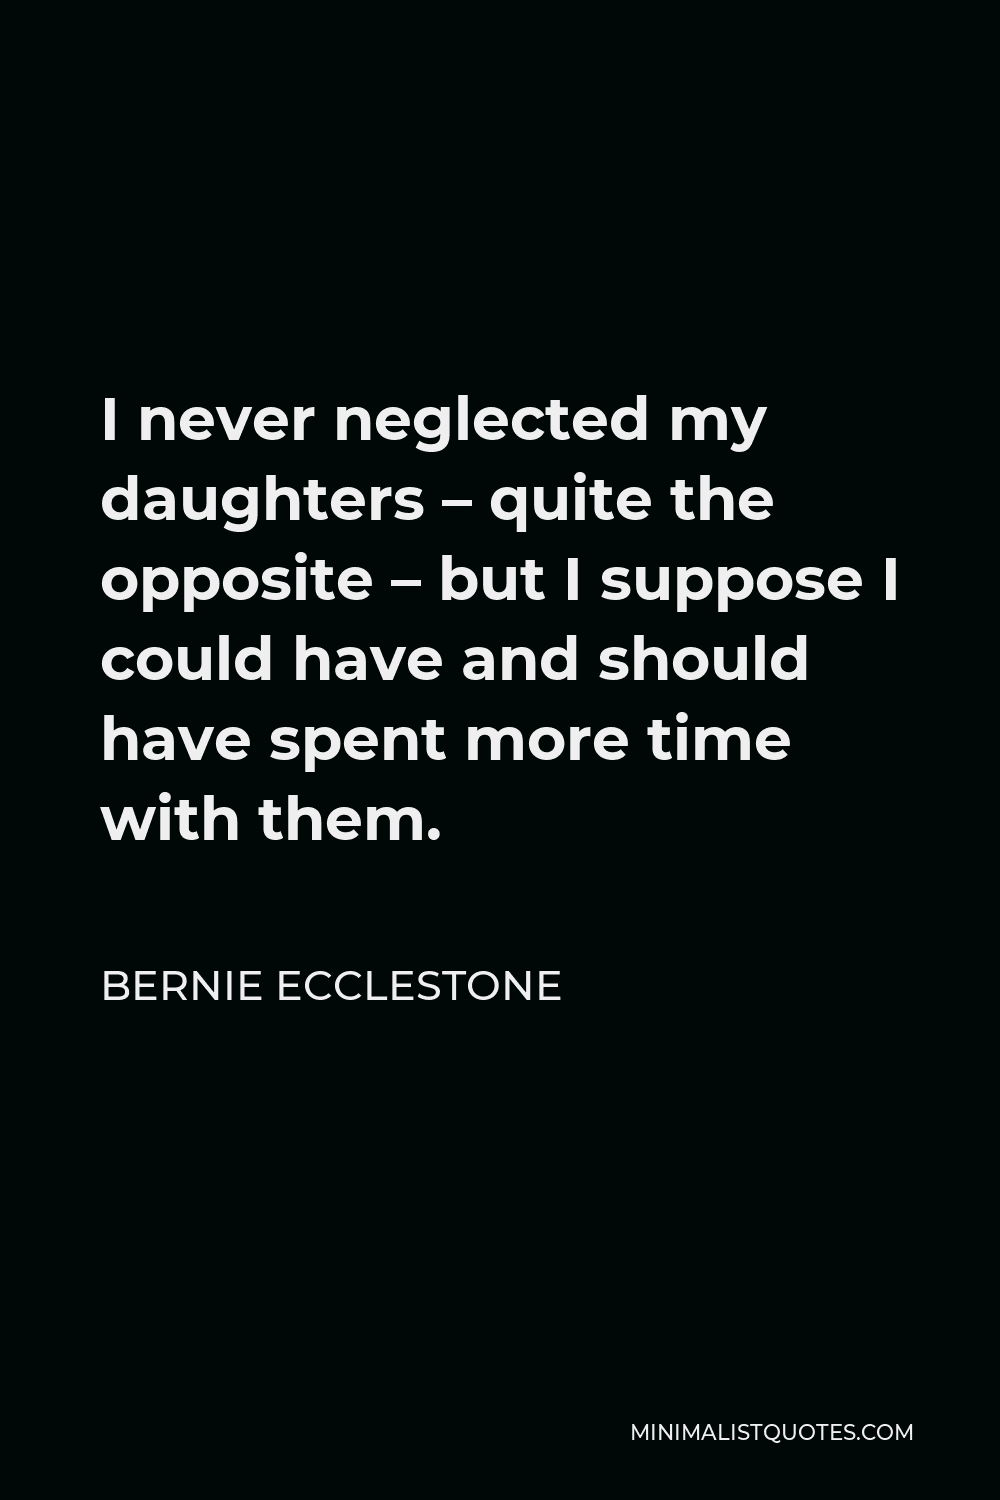 Bernie Ecclestone Quote - I never neglected my daughters – quite the opposite – but I suppose I could have and should have spent more time with them.